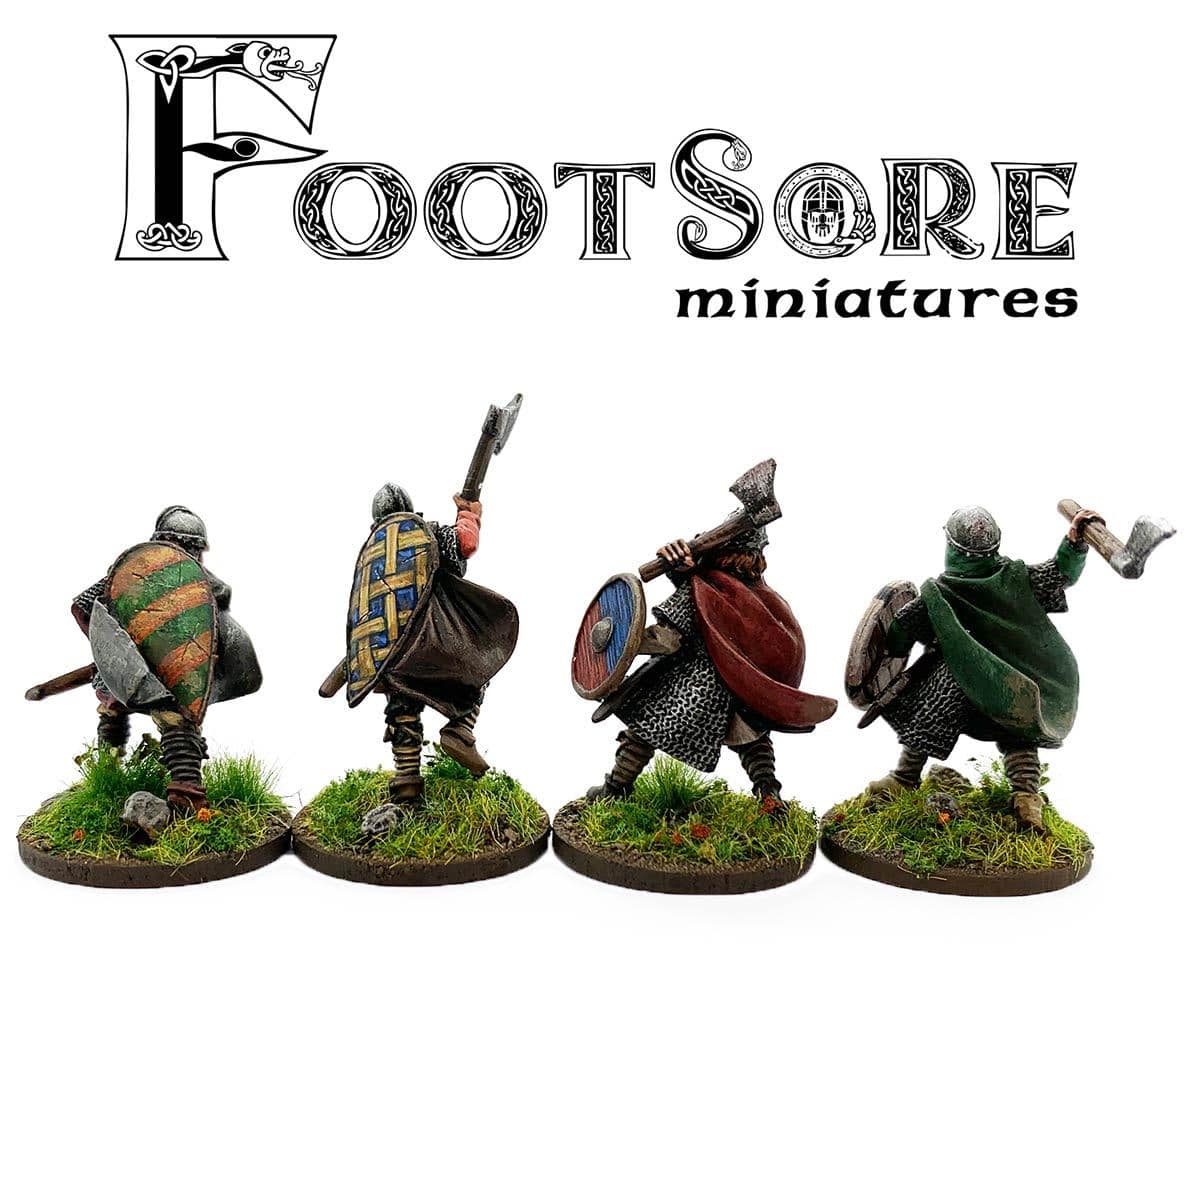 Picts Warriors with Hand Weapons Footsore Miniatures SAGA 0... Dark Ages Scots 